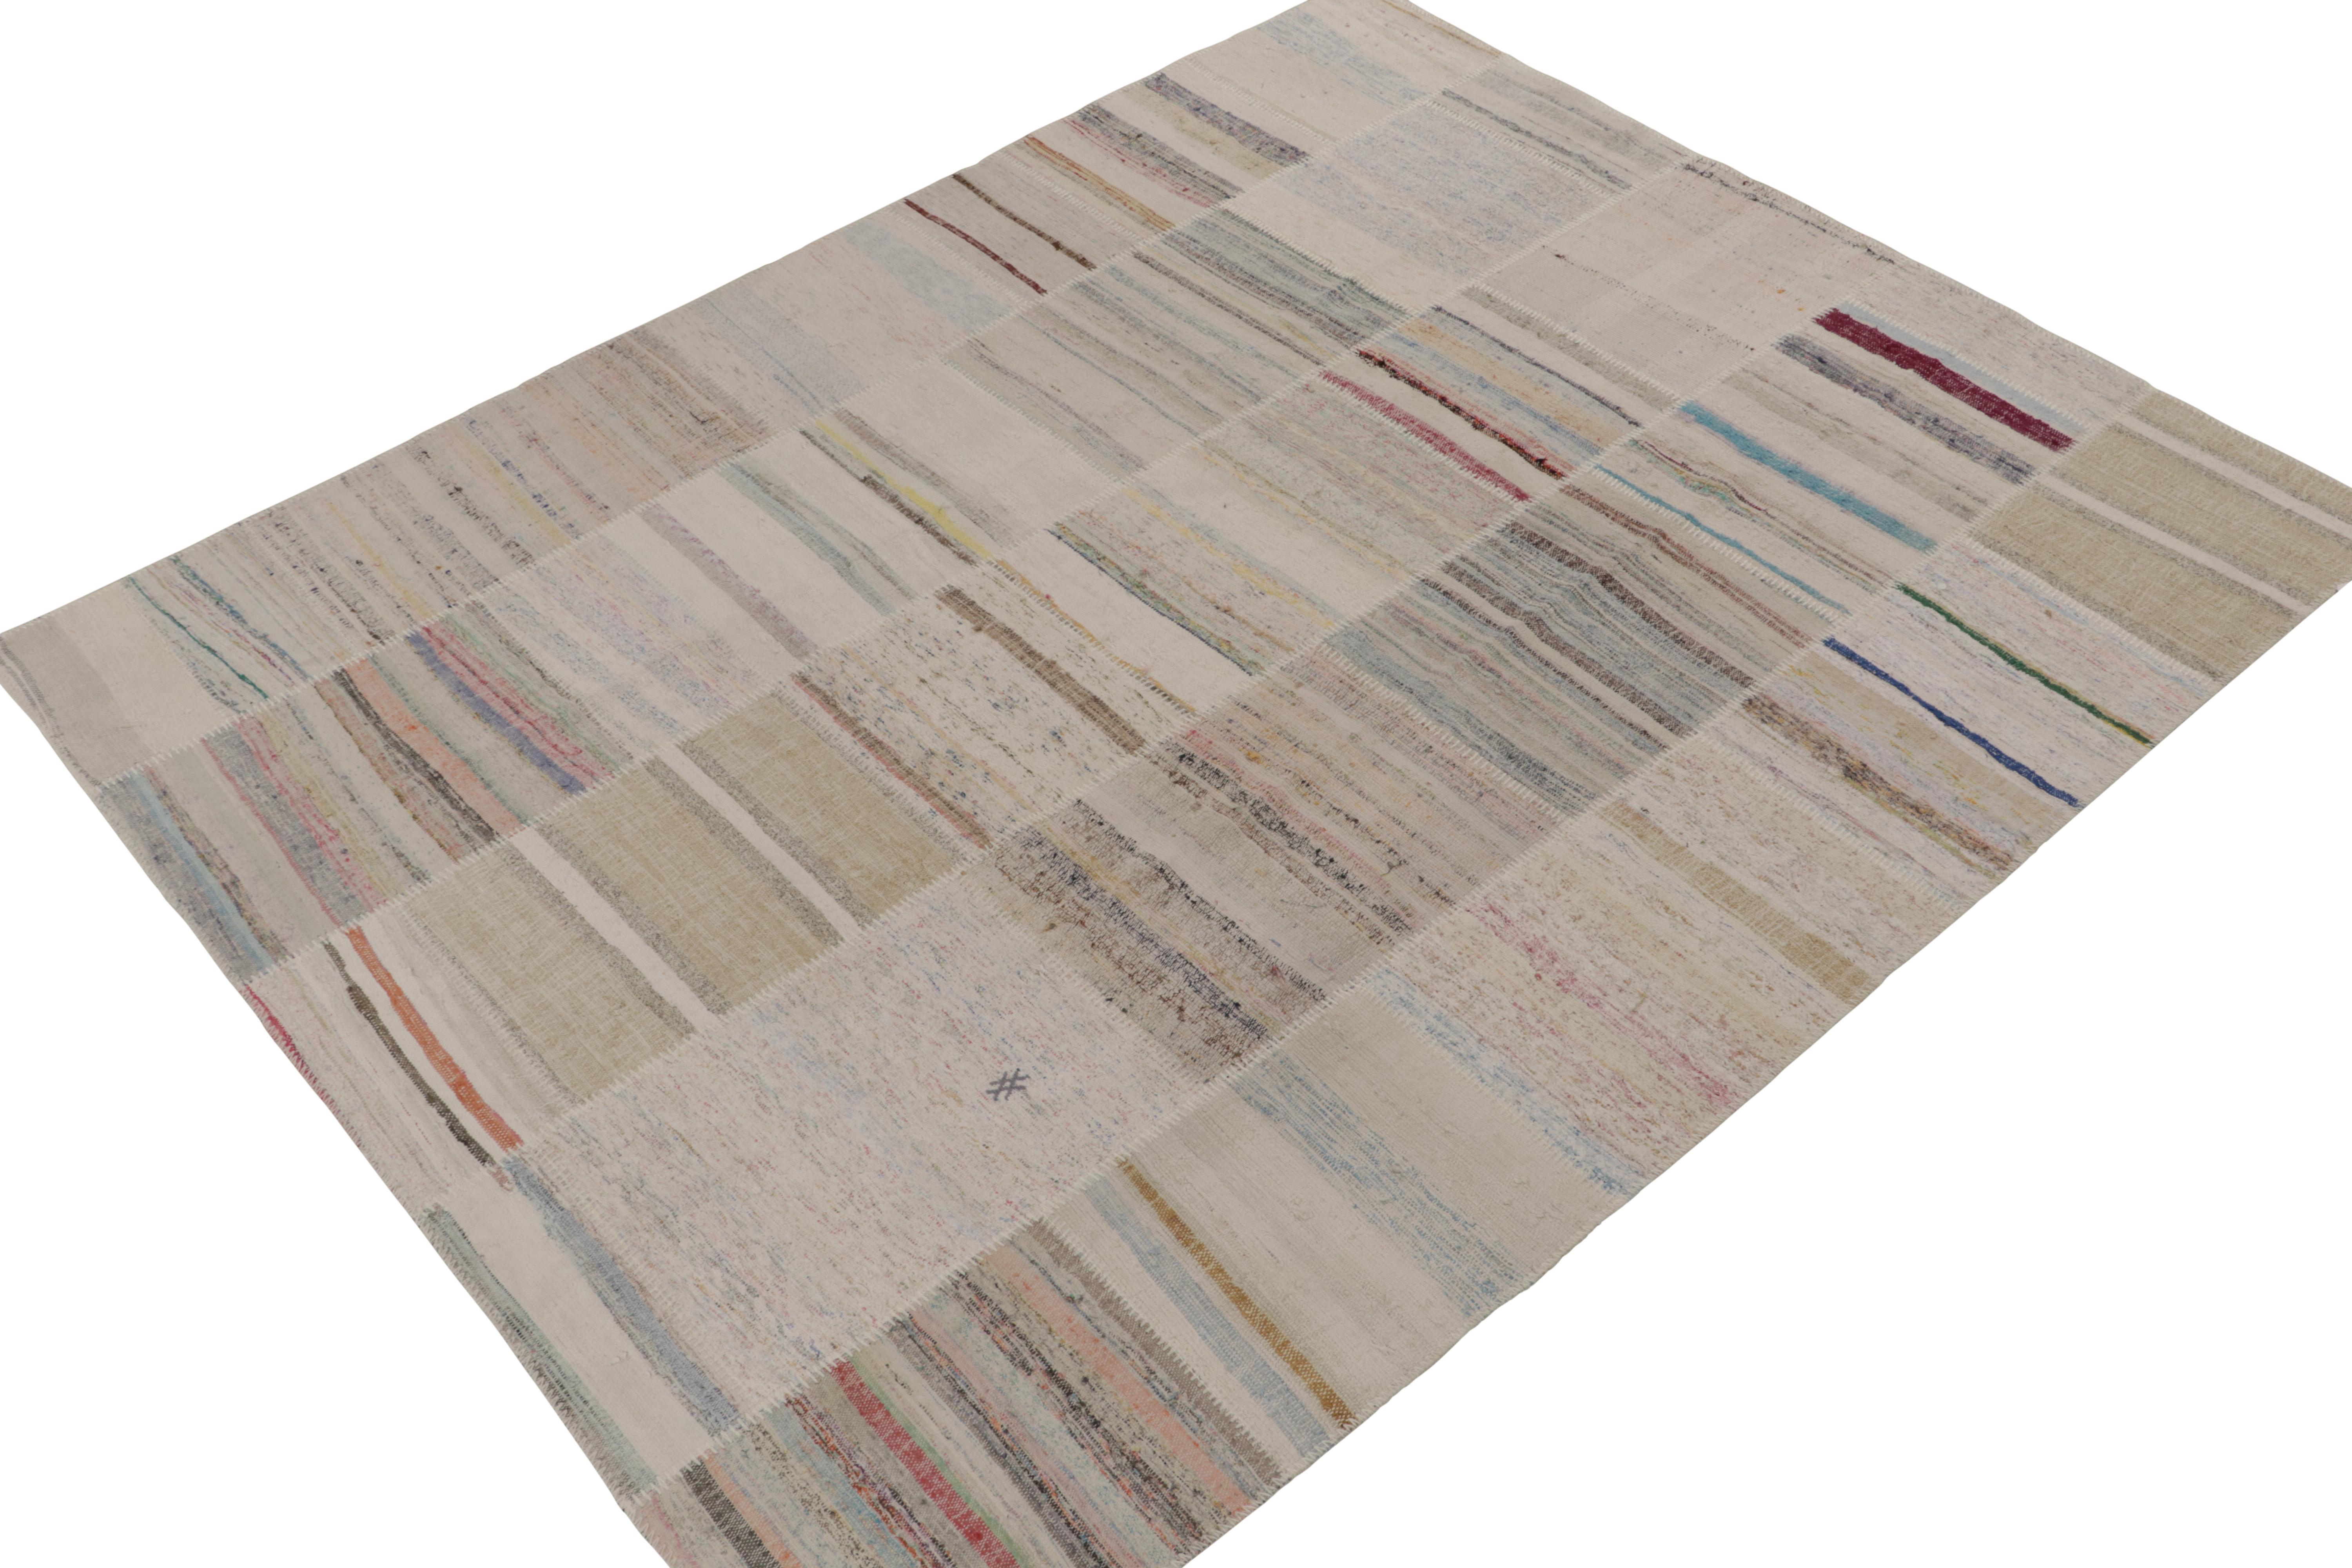 Handwoven in wool, Rug & Kilim presents an 8x10 contemporary rug from their innovative new patchwork kilim collection. 

On the Design: 

This flat weave technique repurposes vintage yarns in polychromatic stripes and striae, achieving a playful